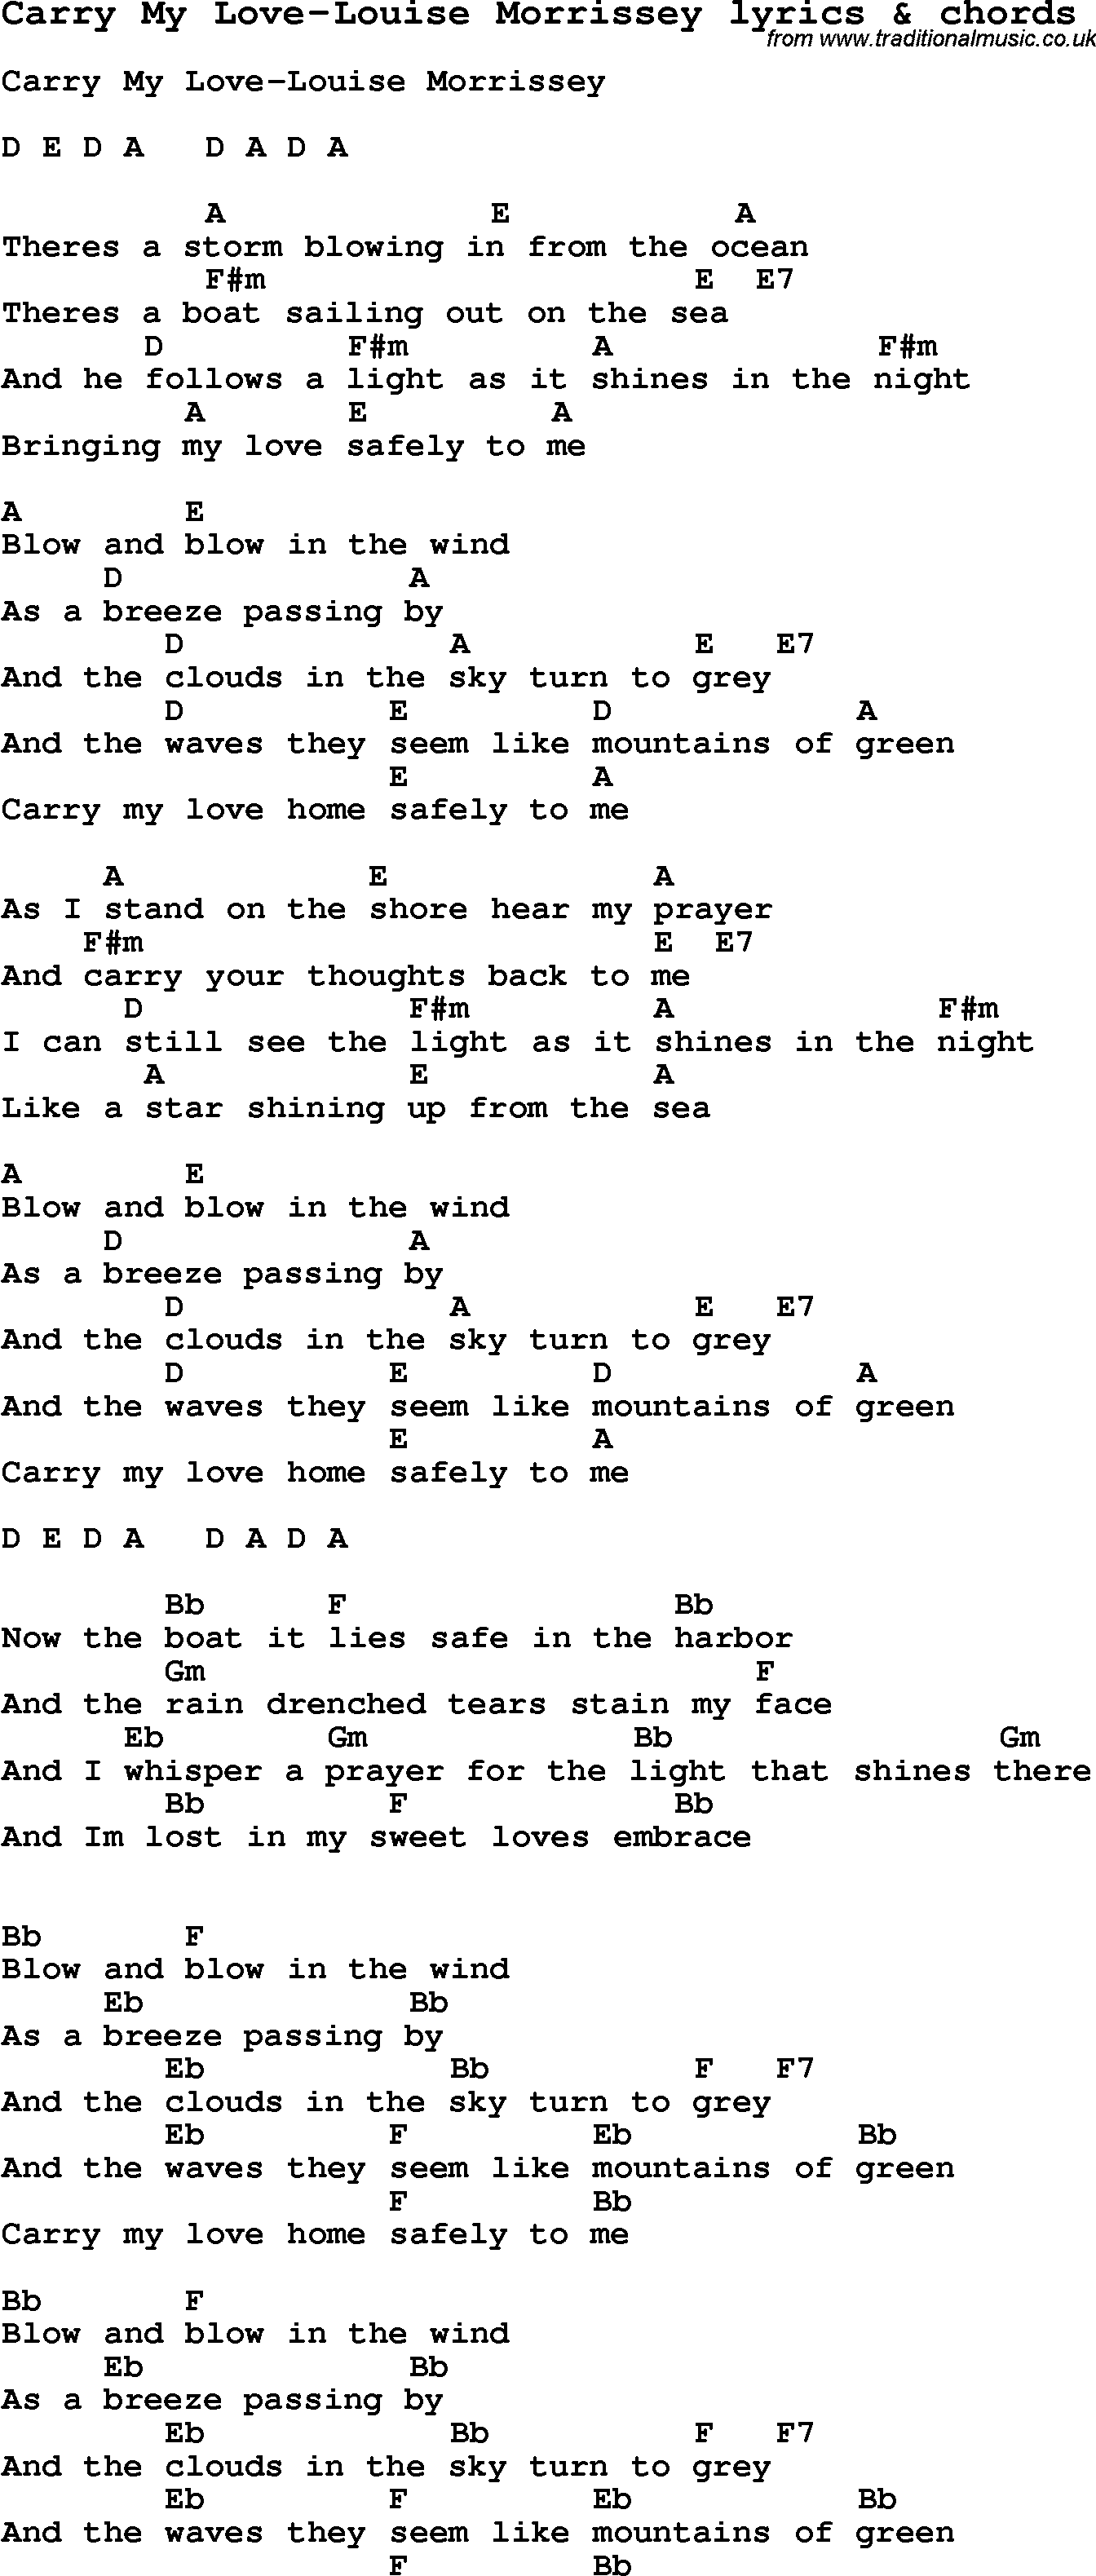 Love Song Lyrics for: Carry My Love-Louise Morrissey with chords for Ukulele, Guitar Banjo etc.